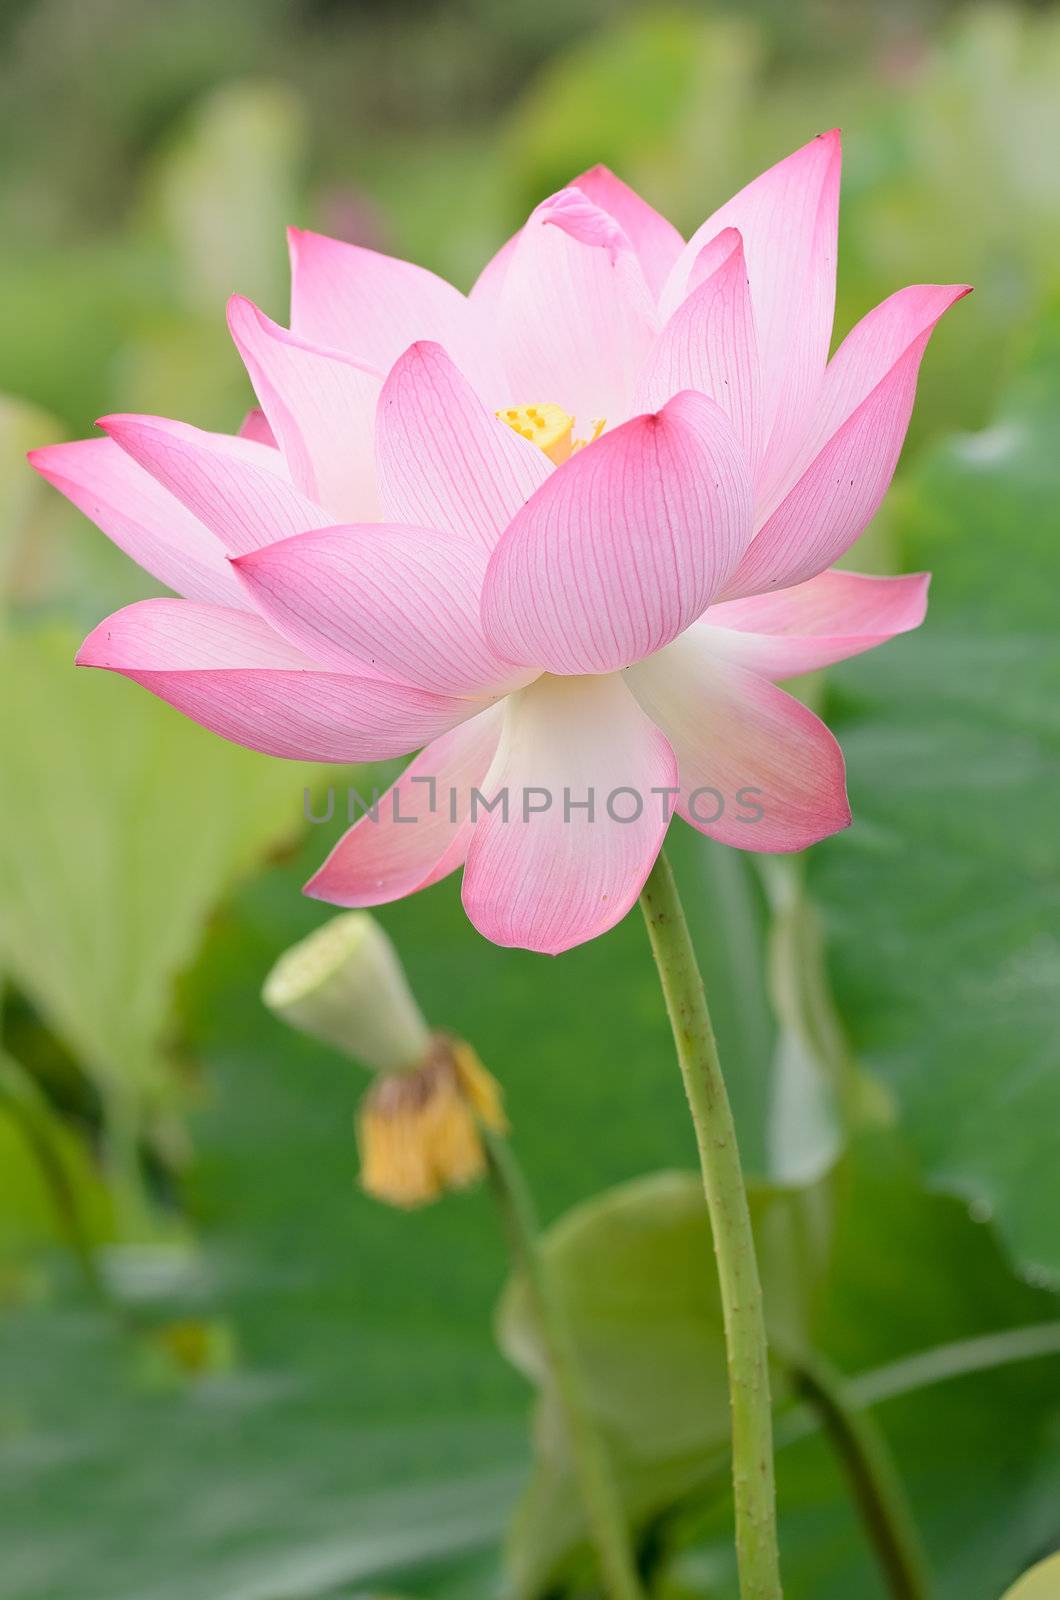 Lotus flower, landscape of nature flora in outdoor with pink and green color in summer.